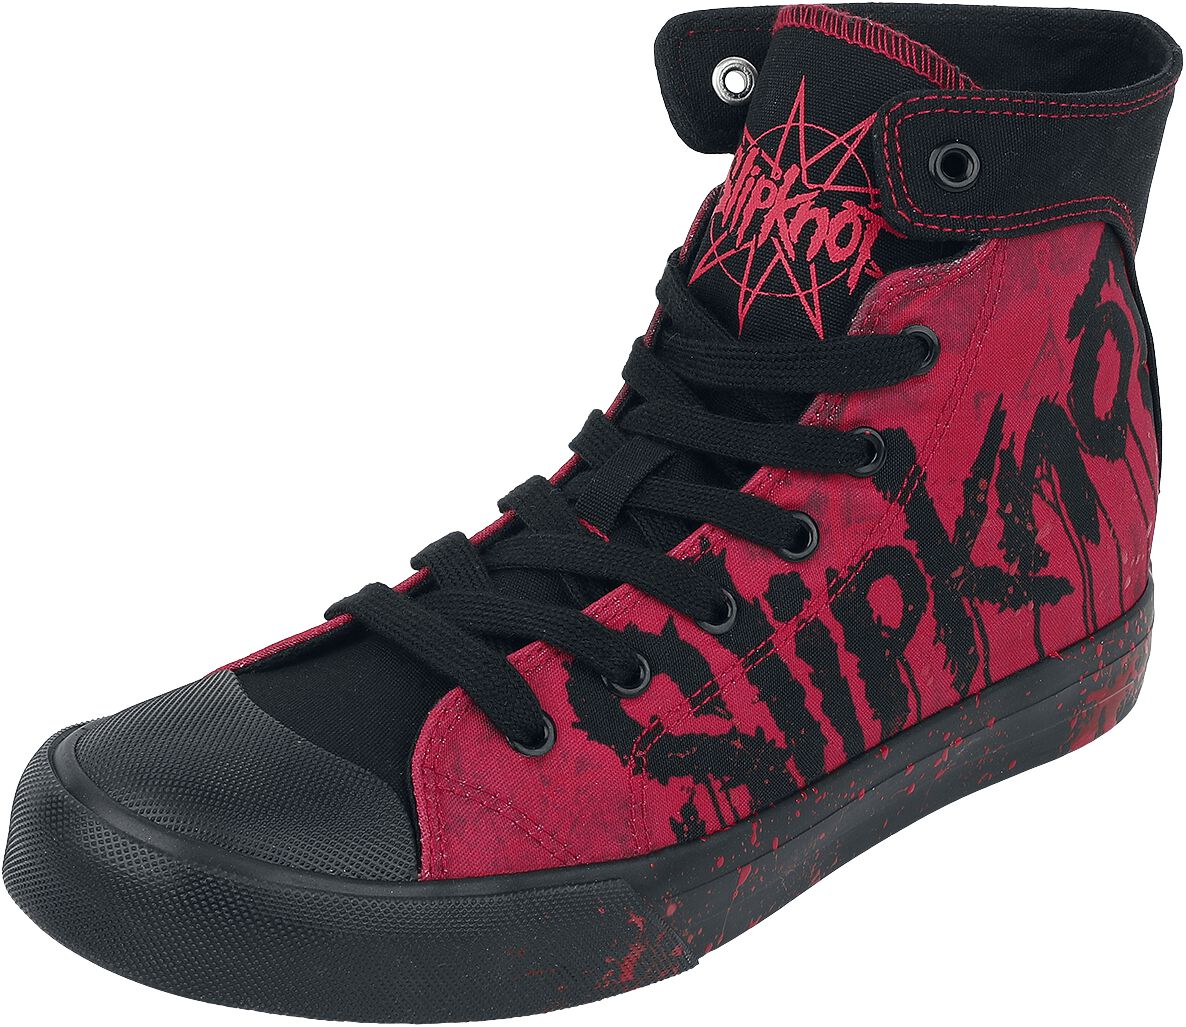 Slipknot EMP Signature Collection Sneakers High black red